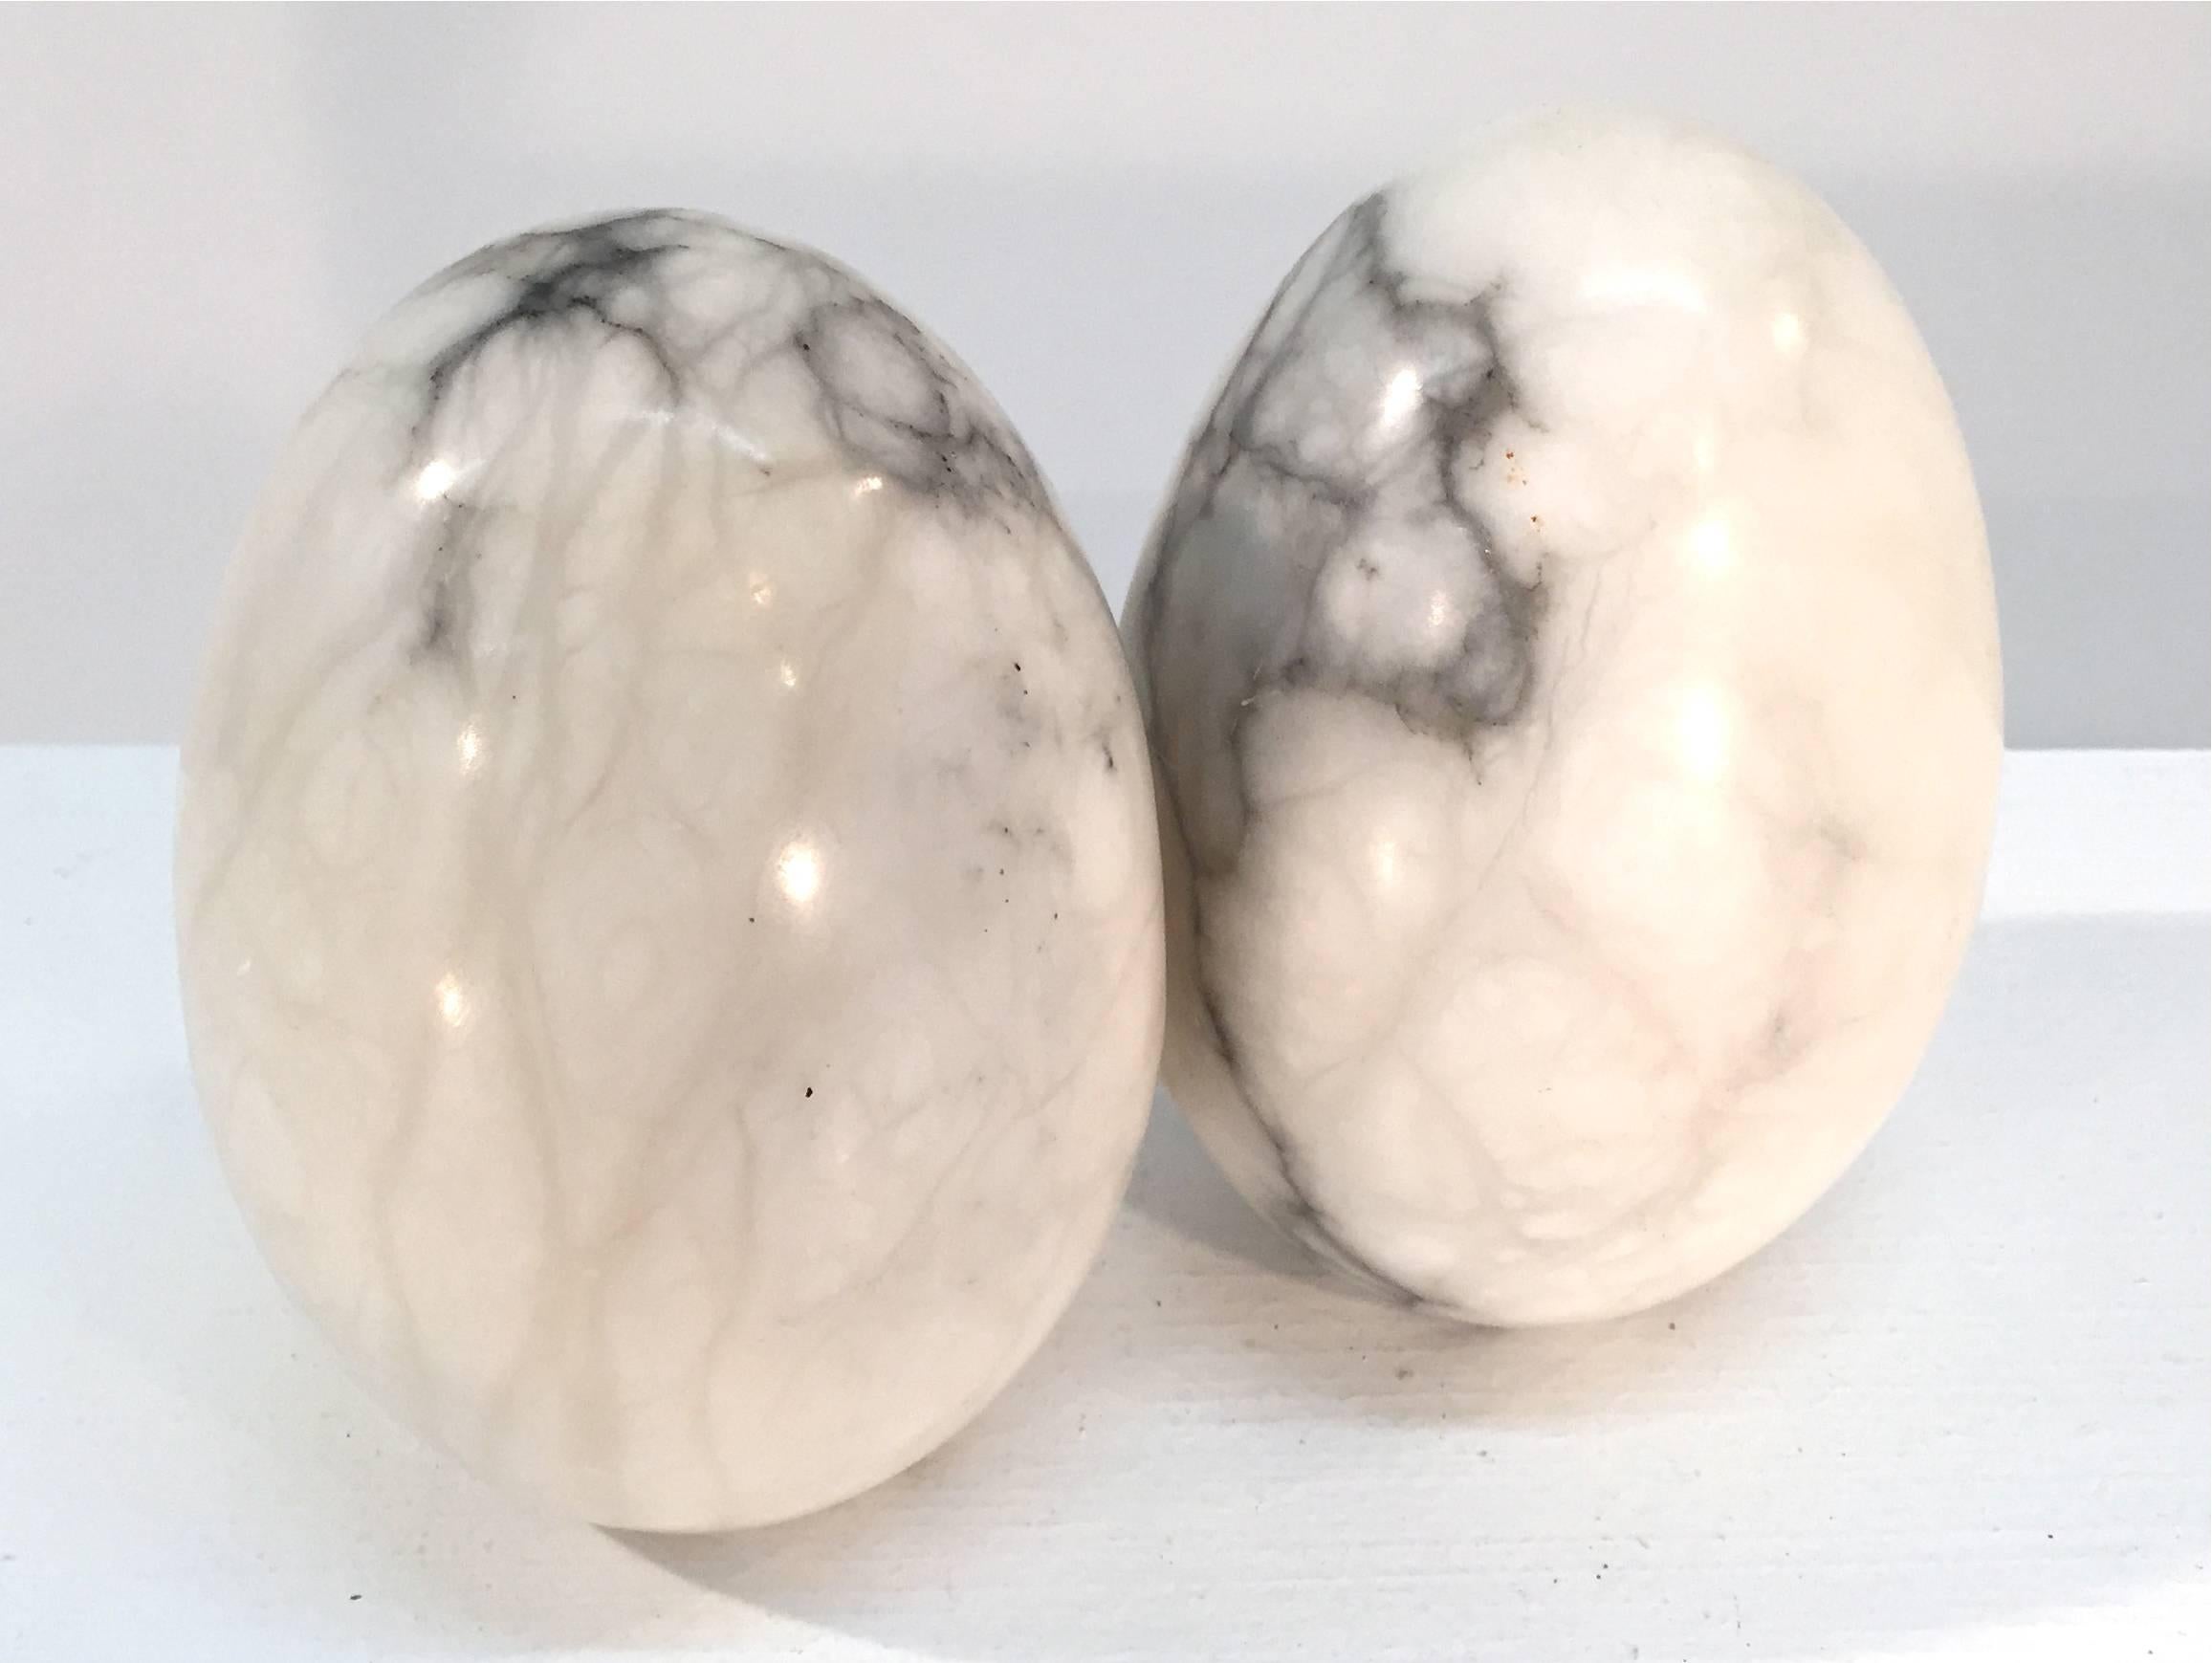 Pair of egg-shaped marble bookends, Italy, 1960s.